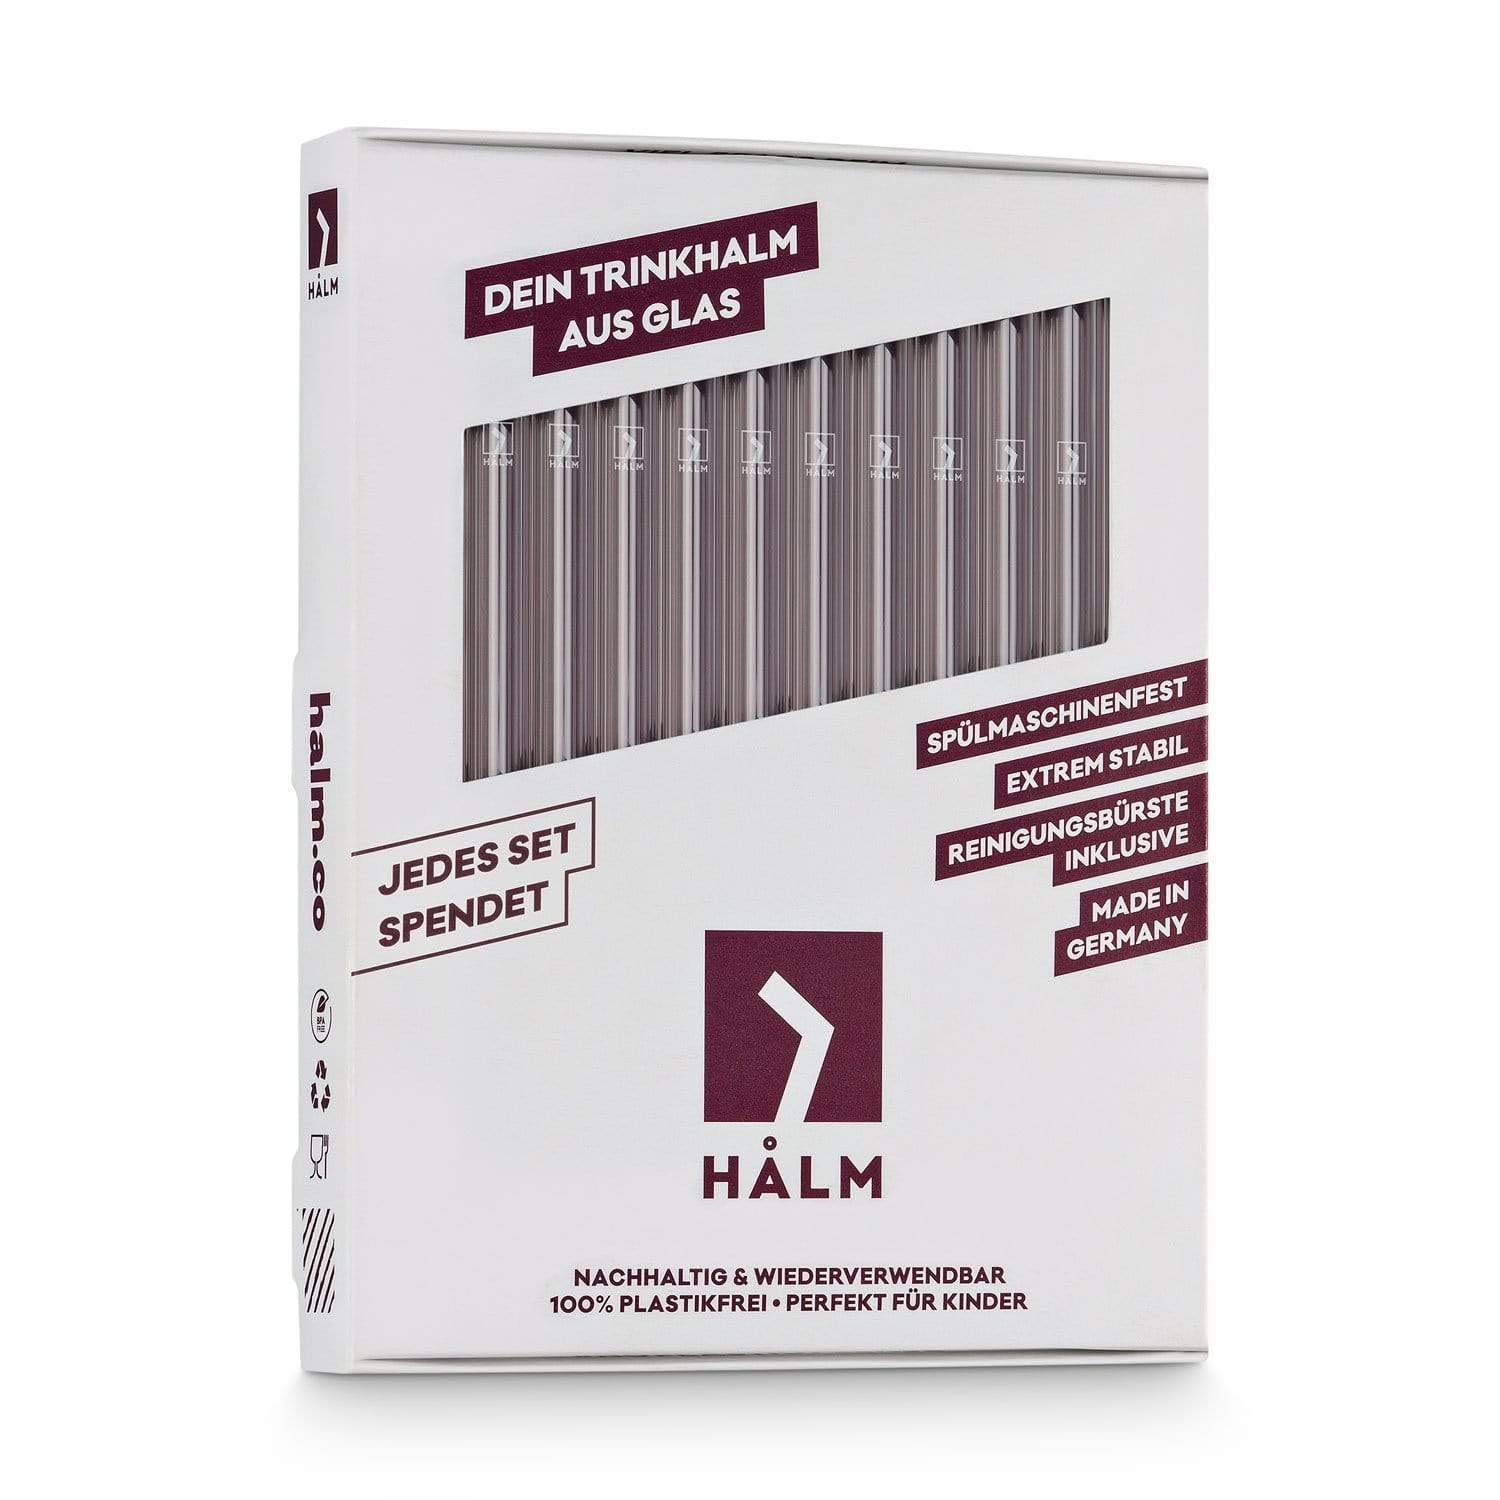 Halm Glass Straws – 20x 6 Inch Short Reusable Drinking Straws + Plastic-Free Cleaning Brush - Dishwasher Safe - Eco-Friendly - Perfect for Parties, Tumbler, Cocktails - Made in Germany